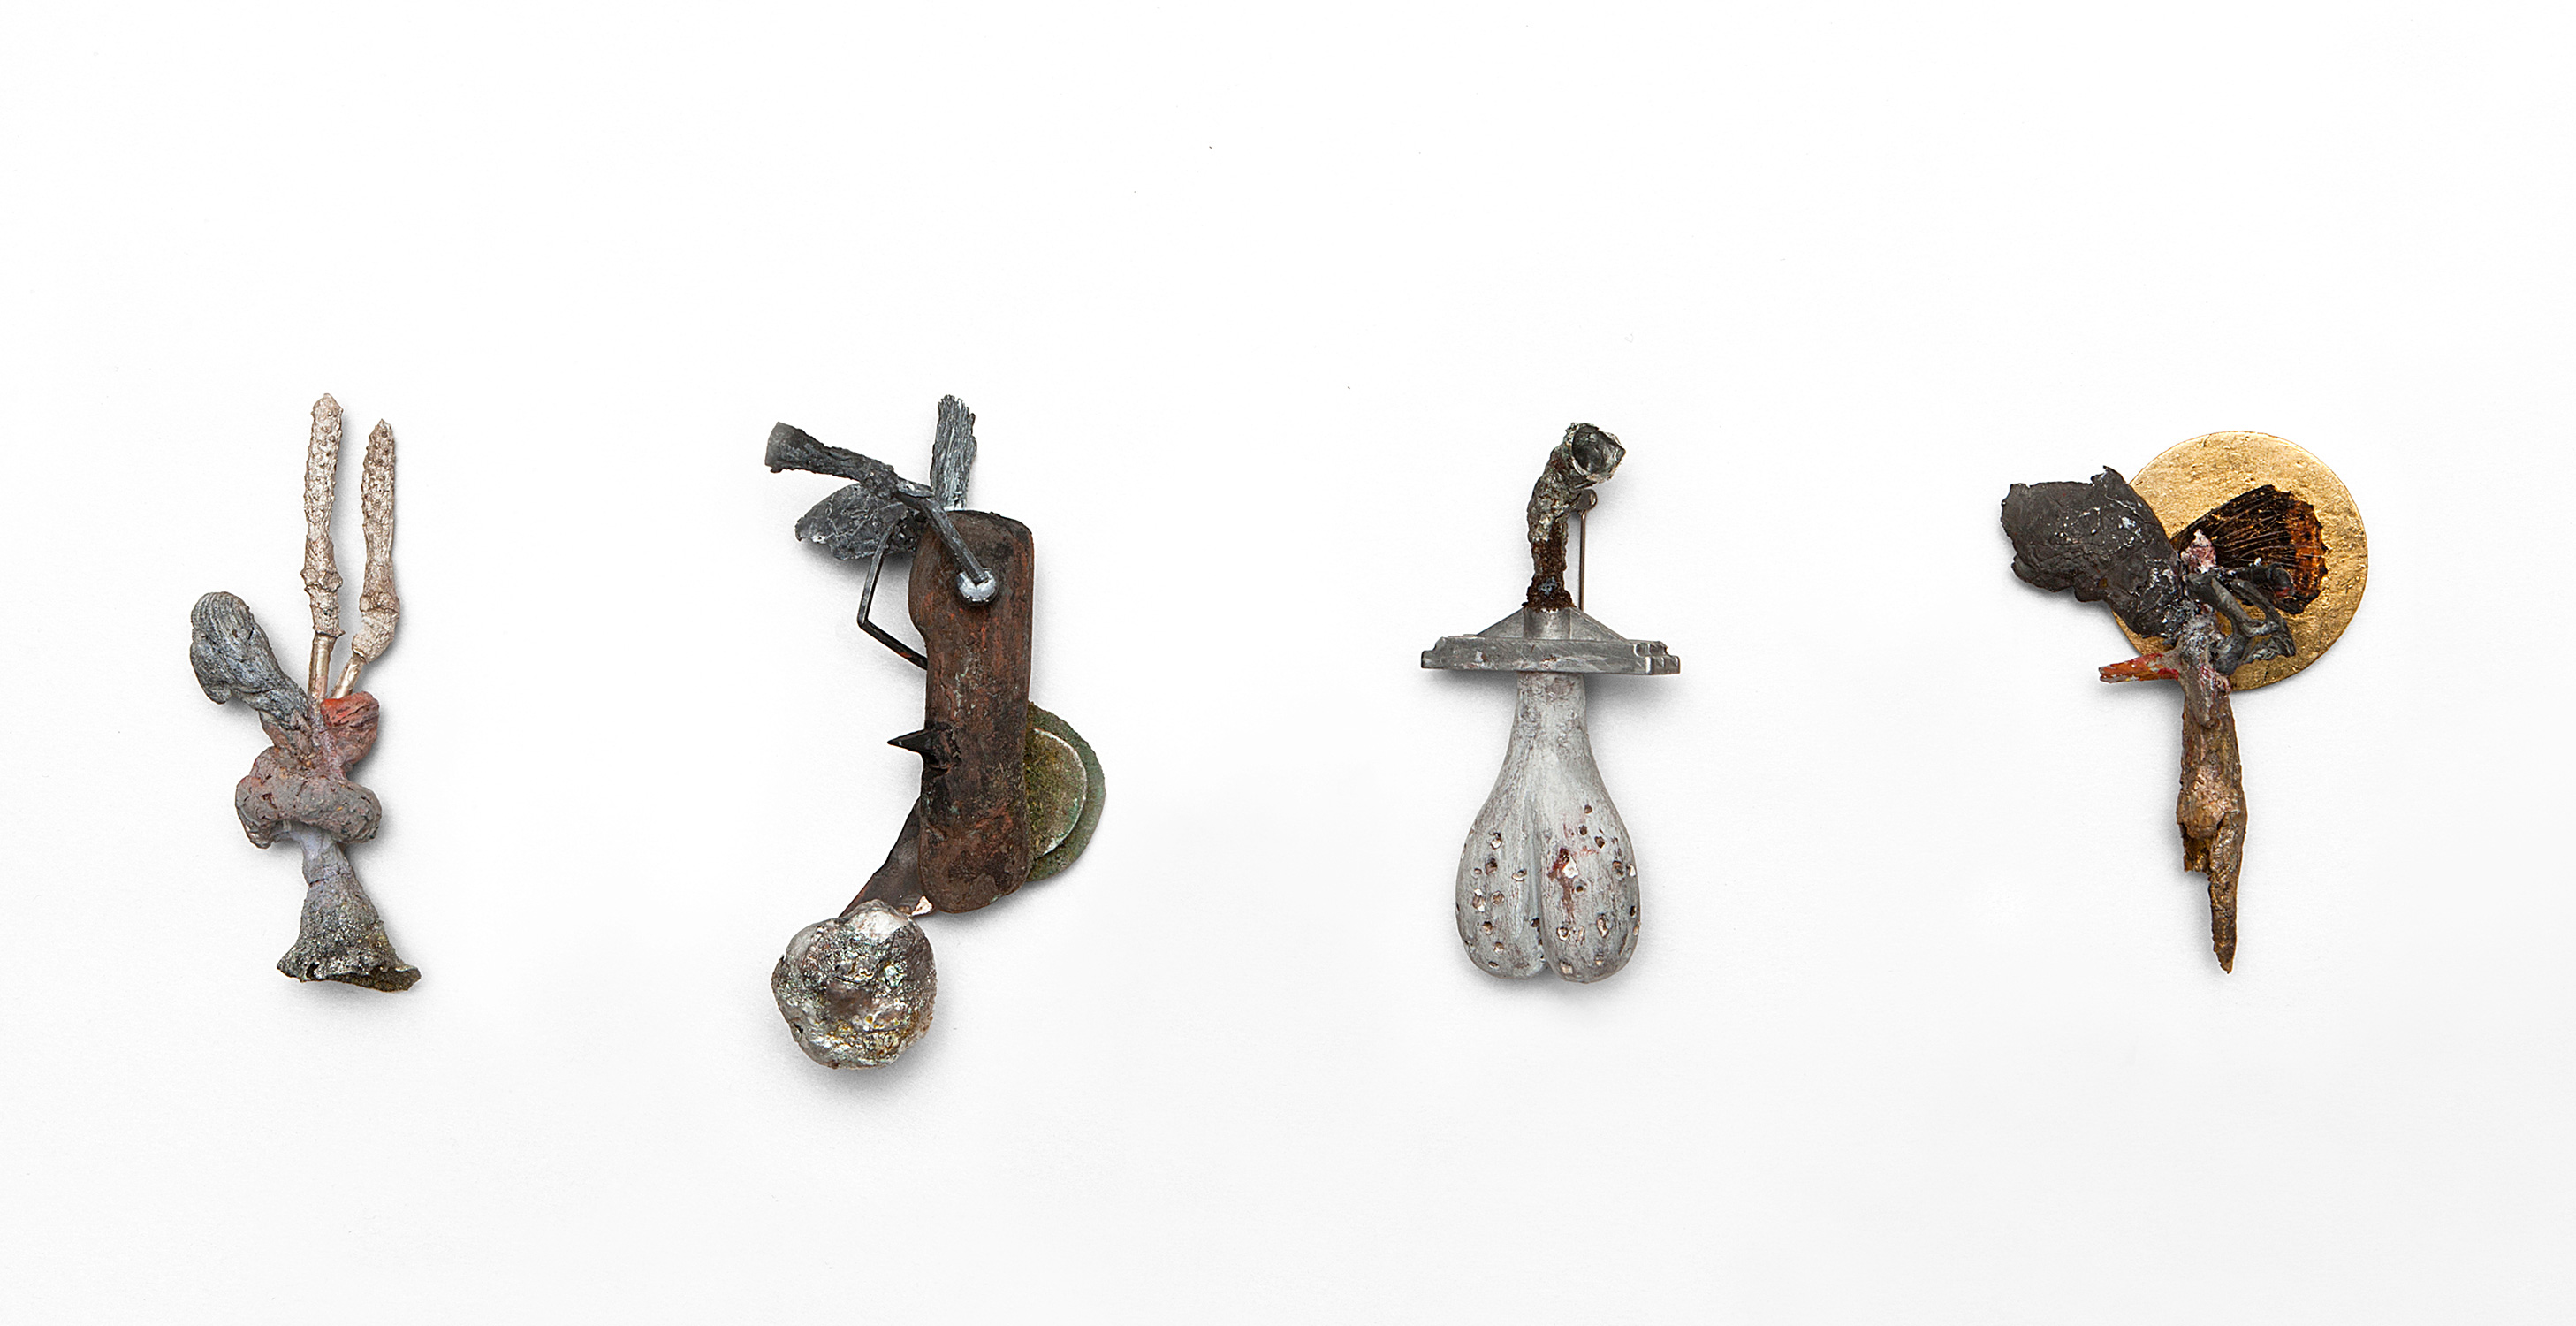 From Left: Untitled, "Édouard Brown-Séquard" |  Brooch, Pendant  | 2013-14 | Wood, color, silver, stainless steel, brass, enamel, aluminium, enamel, gold leaf, butterfly, plastic  | 100X30X20 mm - 80X35X25 mm